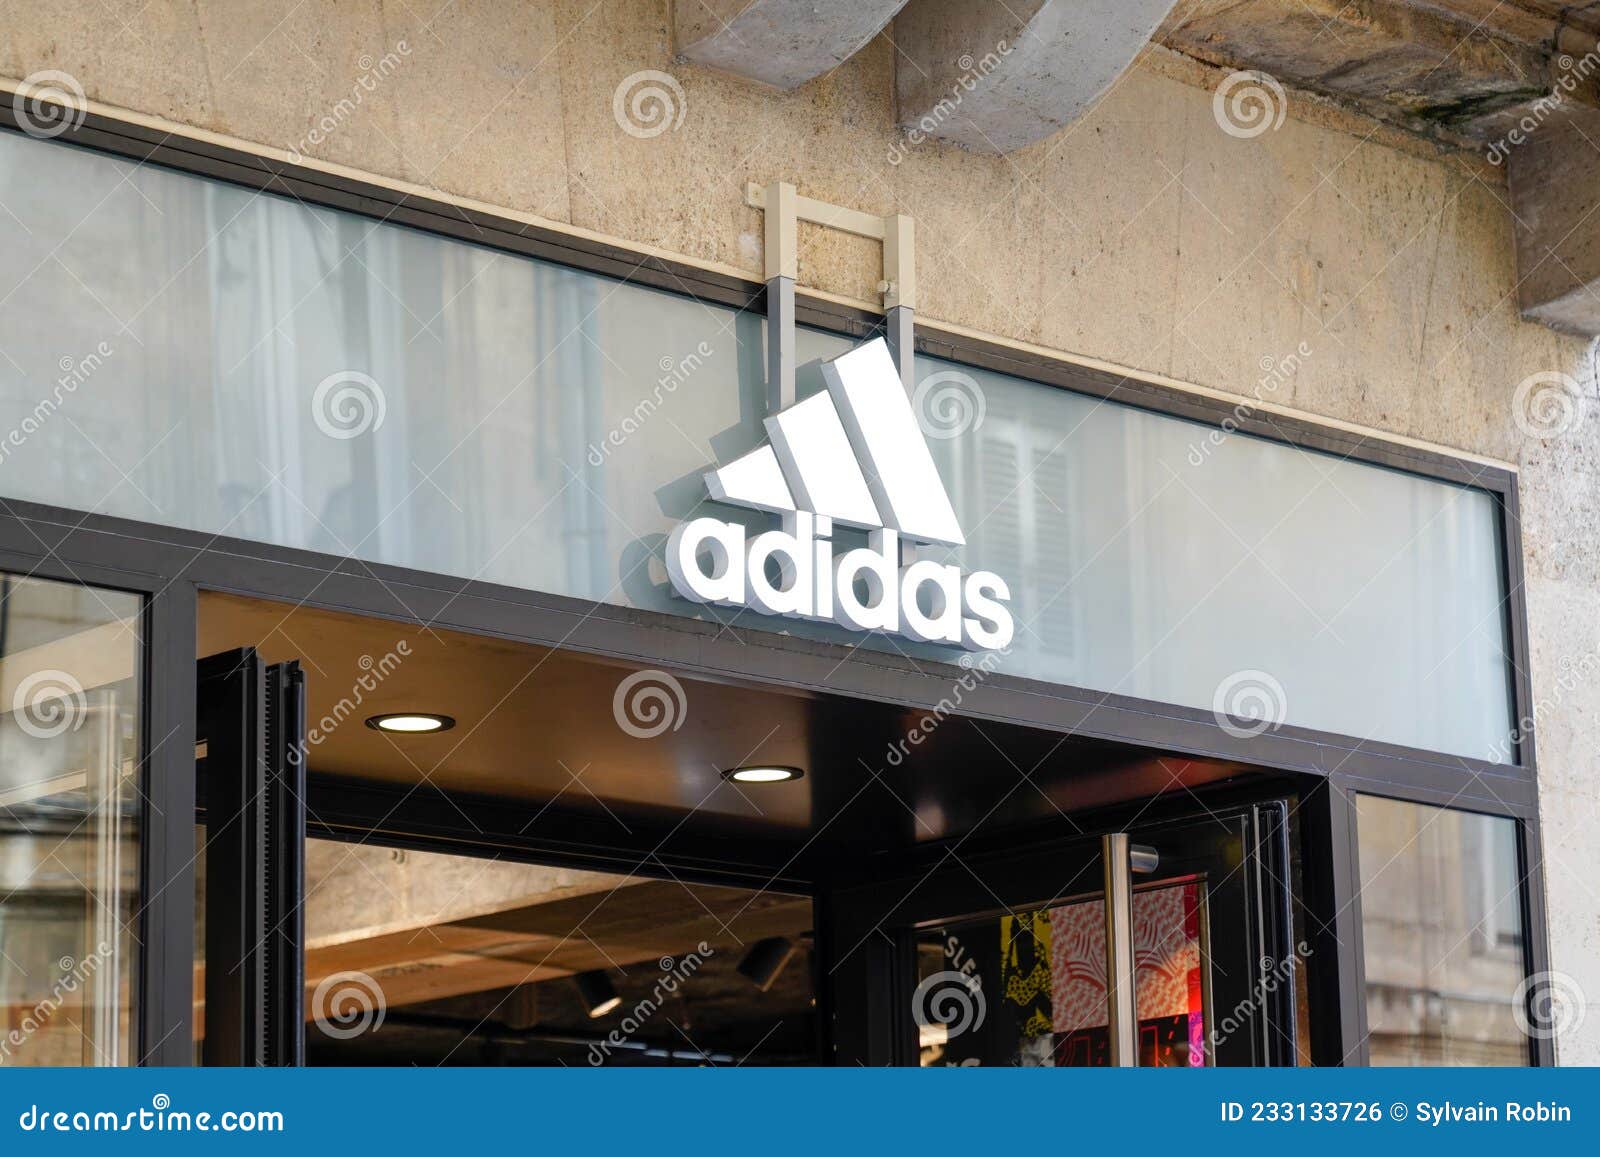 Adidas Logo Sign and Text Front of Sporty Shop Shoes Boutique Sport Footwear Editorial Photo - Image of clothes, clothing: 233133726